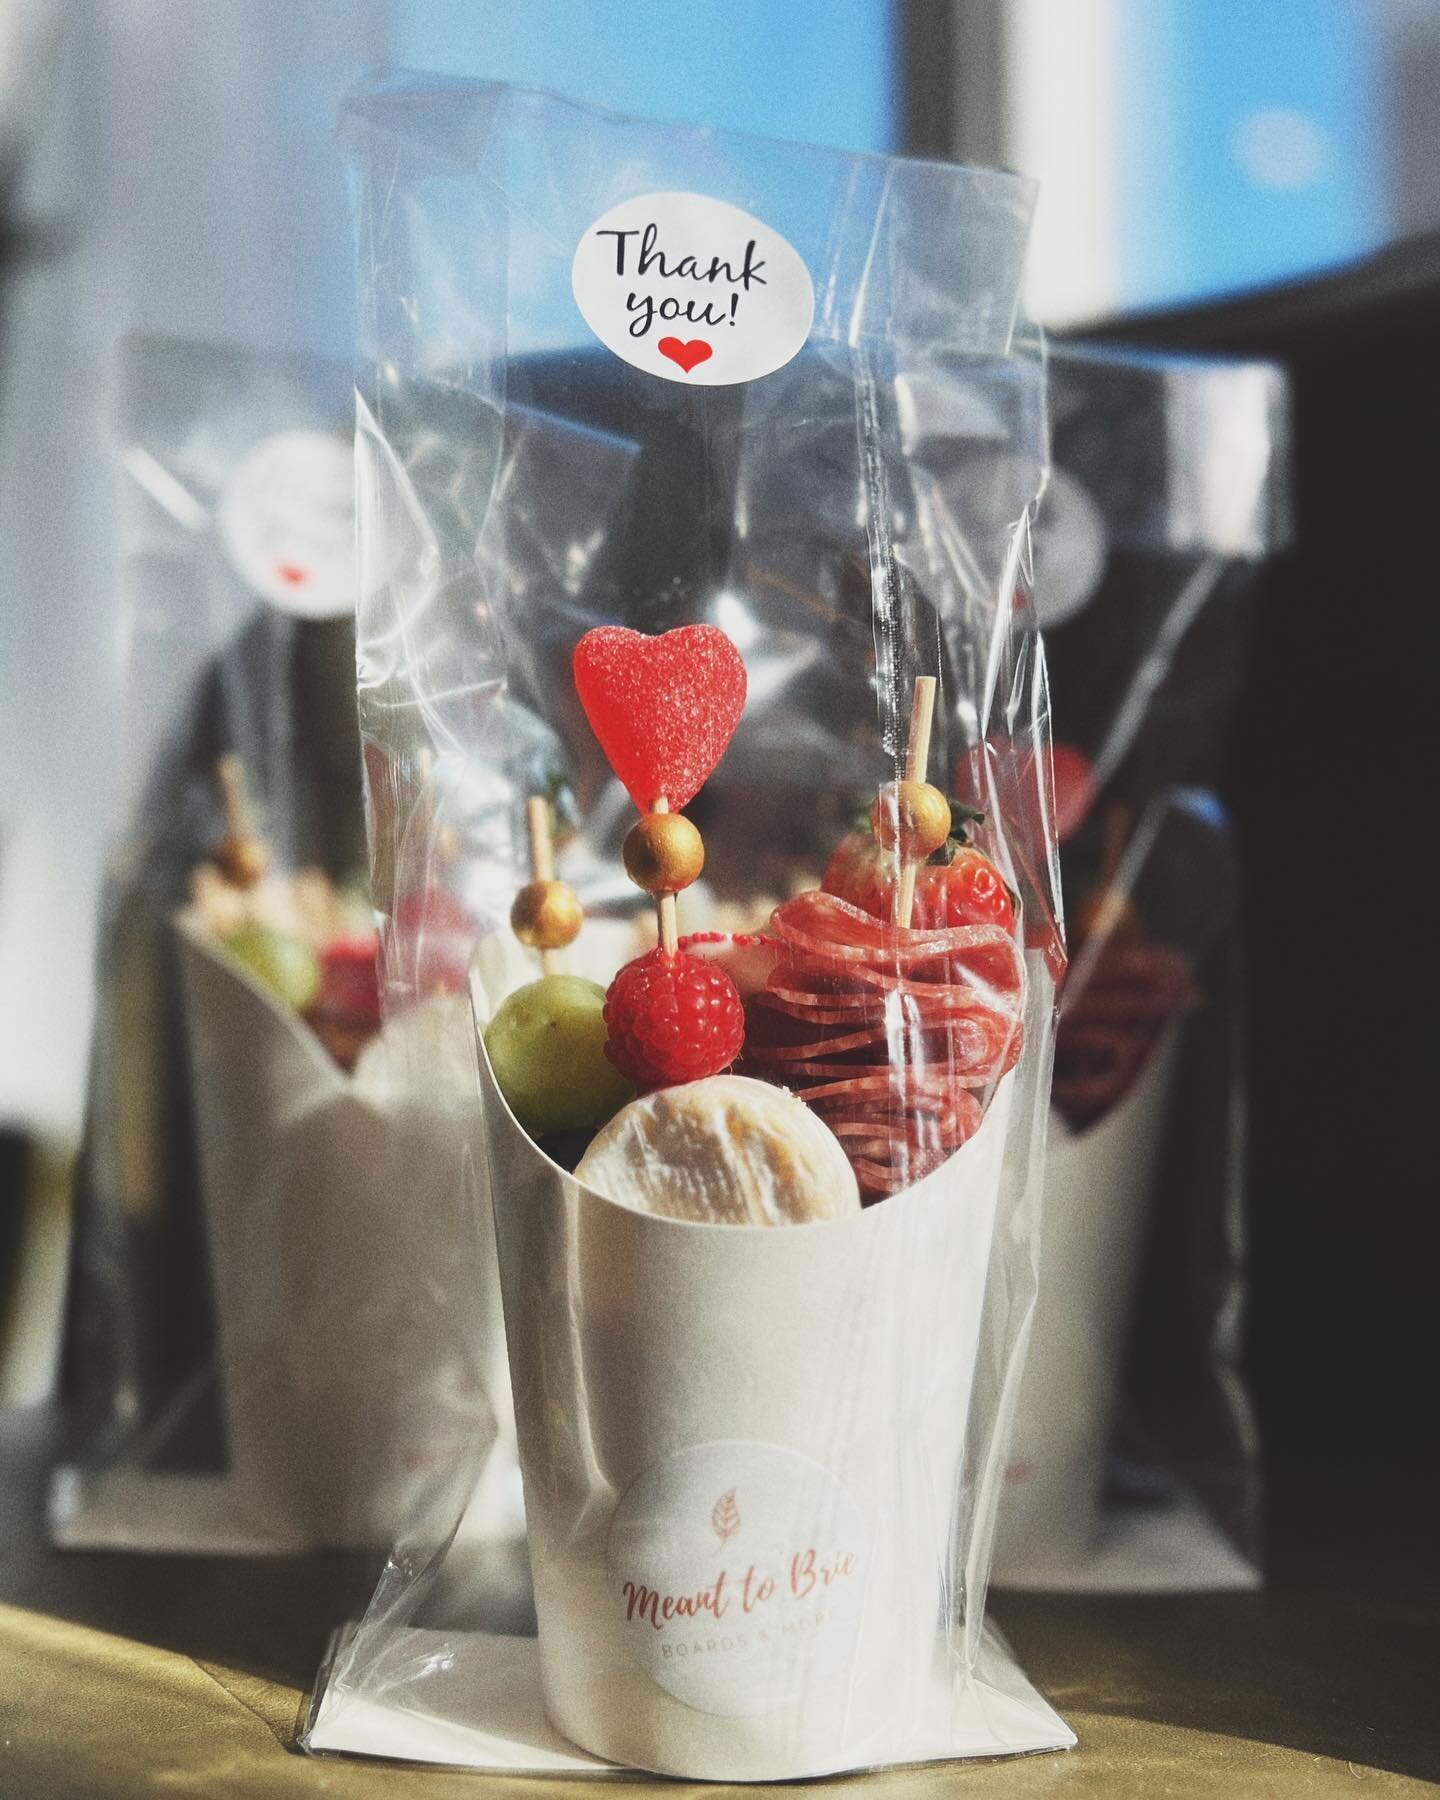 Check out these valentine char-cute-ries from the wonderful Meant to Brie here in town 😍🤤

We have them at the salon for each of our lovely clients coming in today, we are so grateful for you and want to show our appreciation on this day of 💕love?